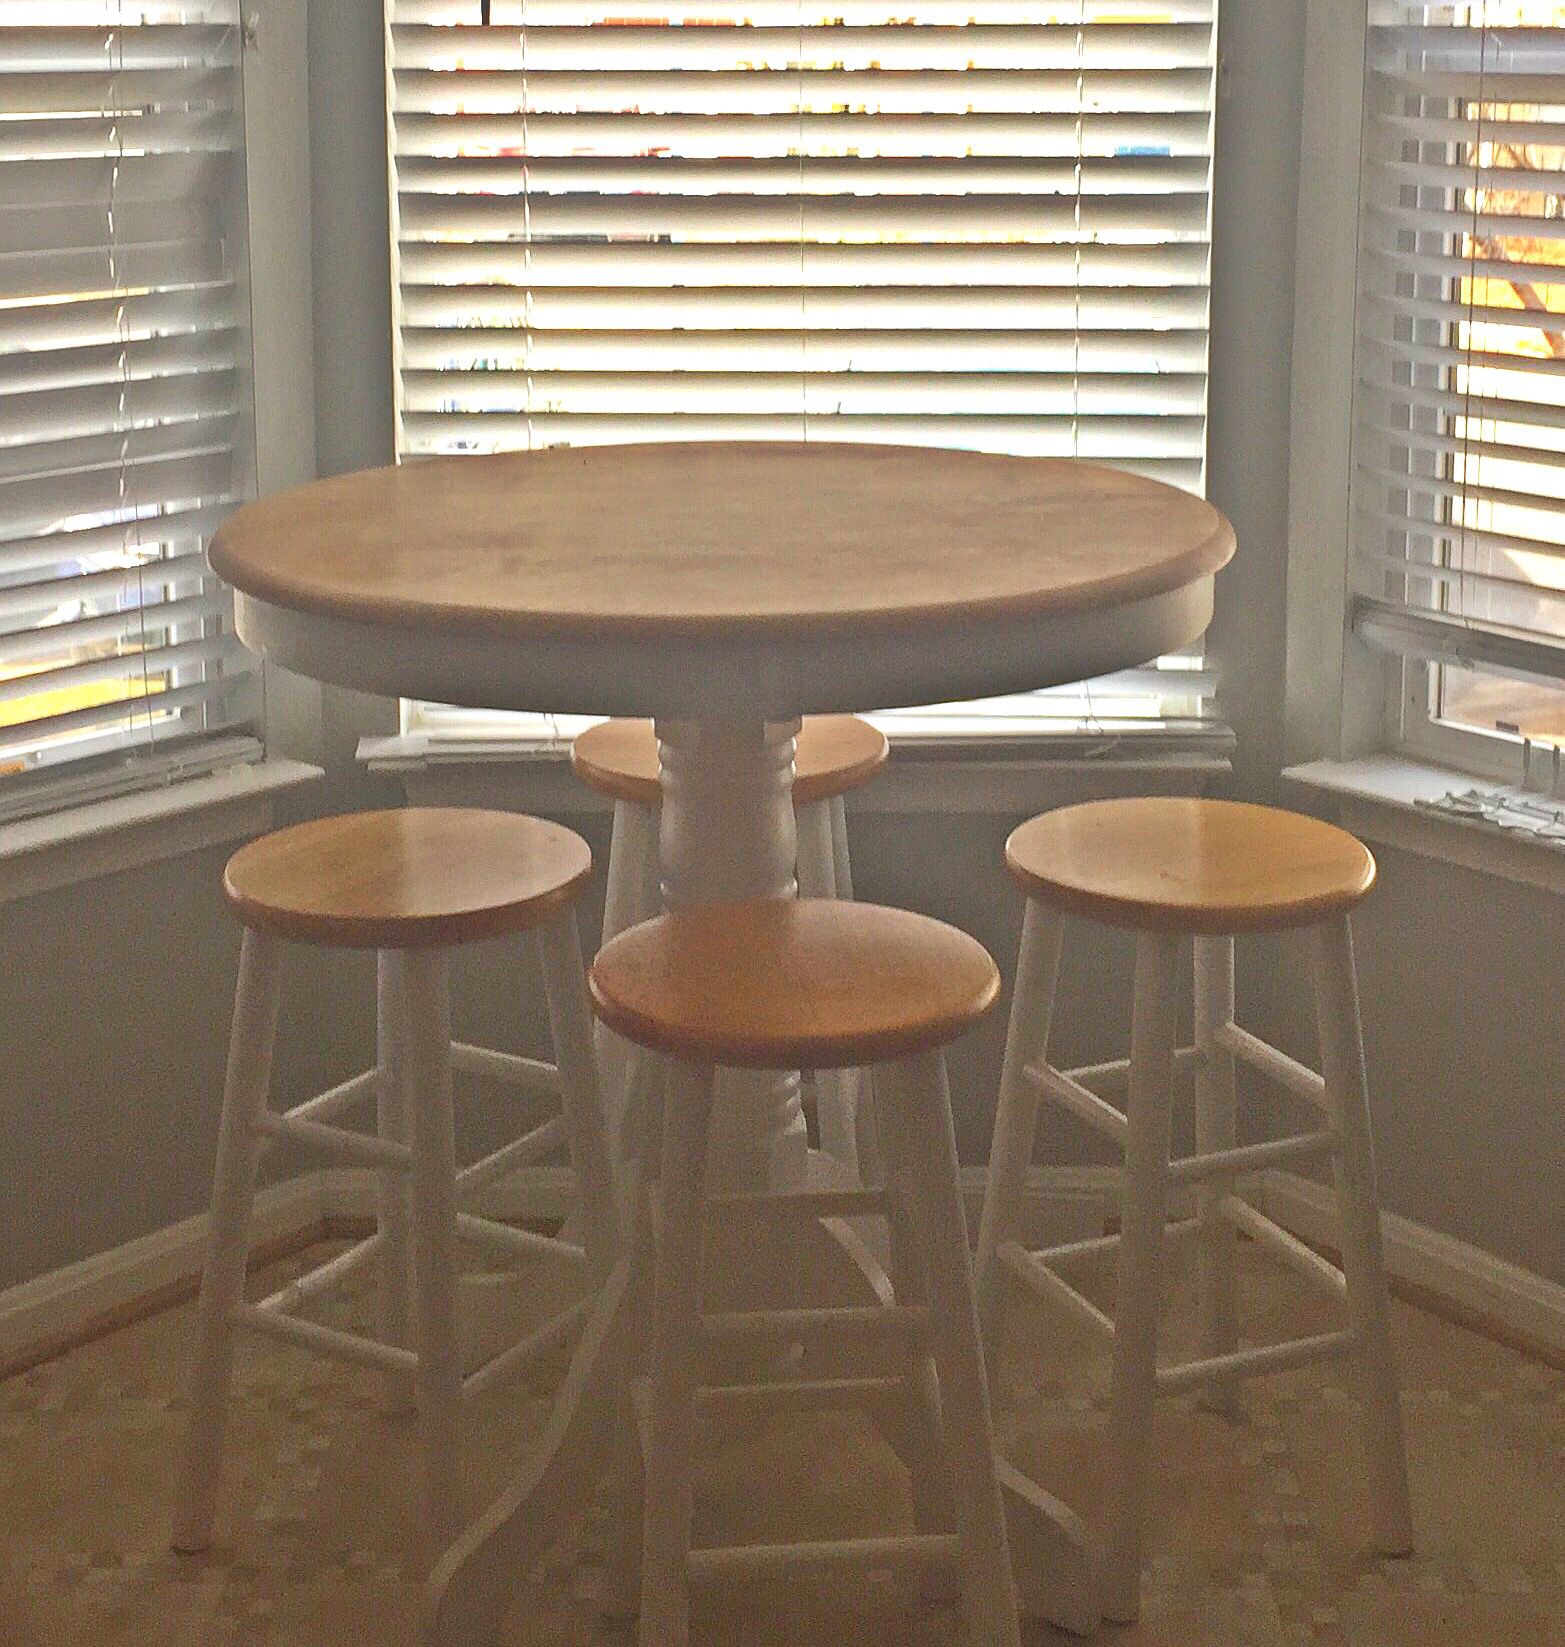 Pub style kitchenette Table and Stools